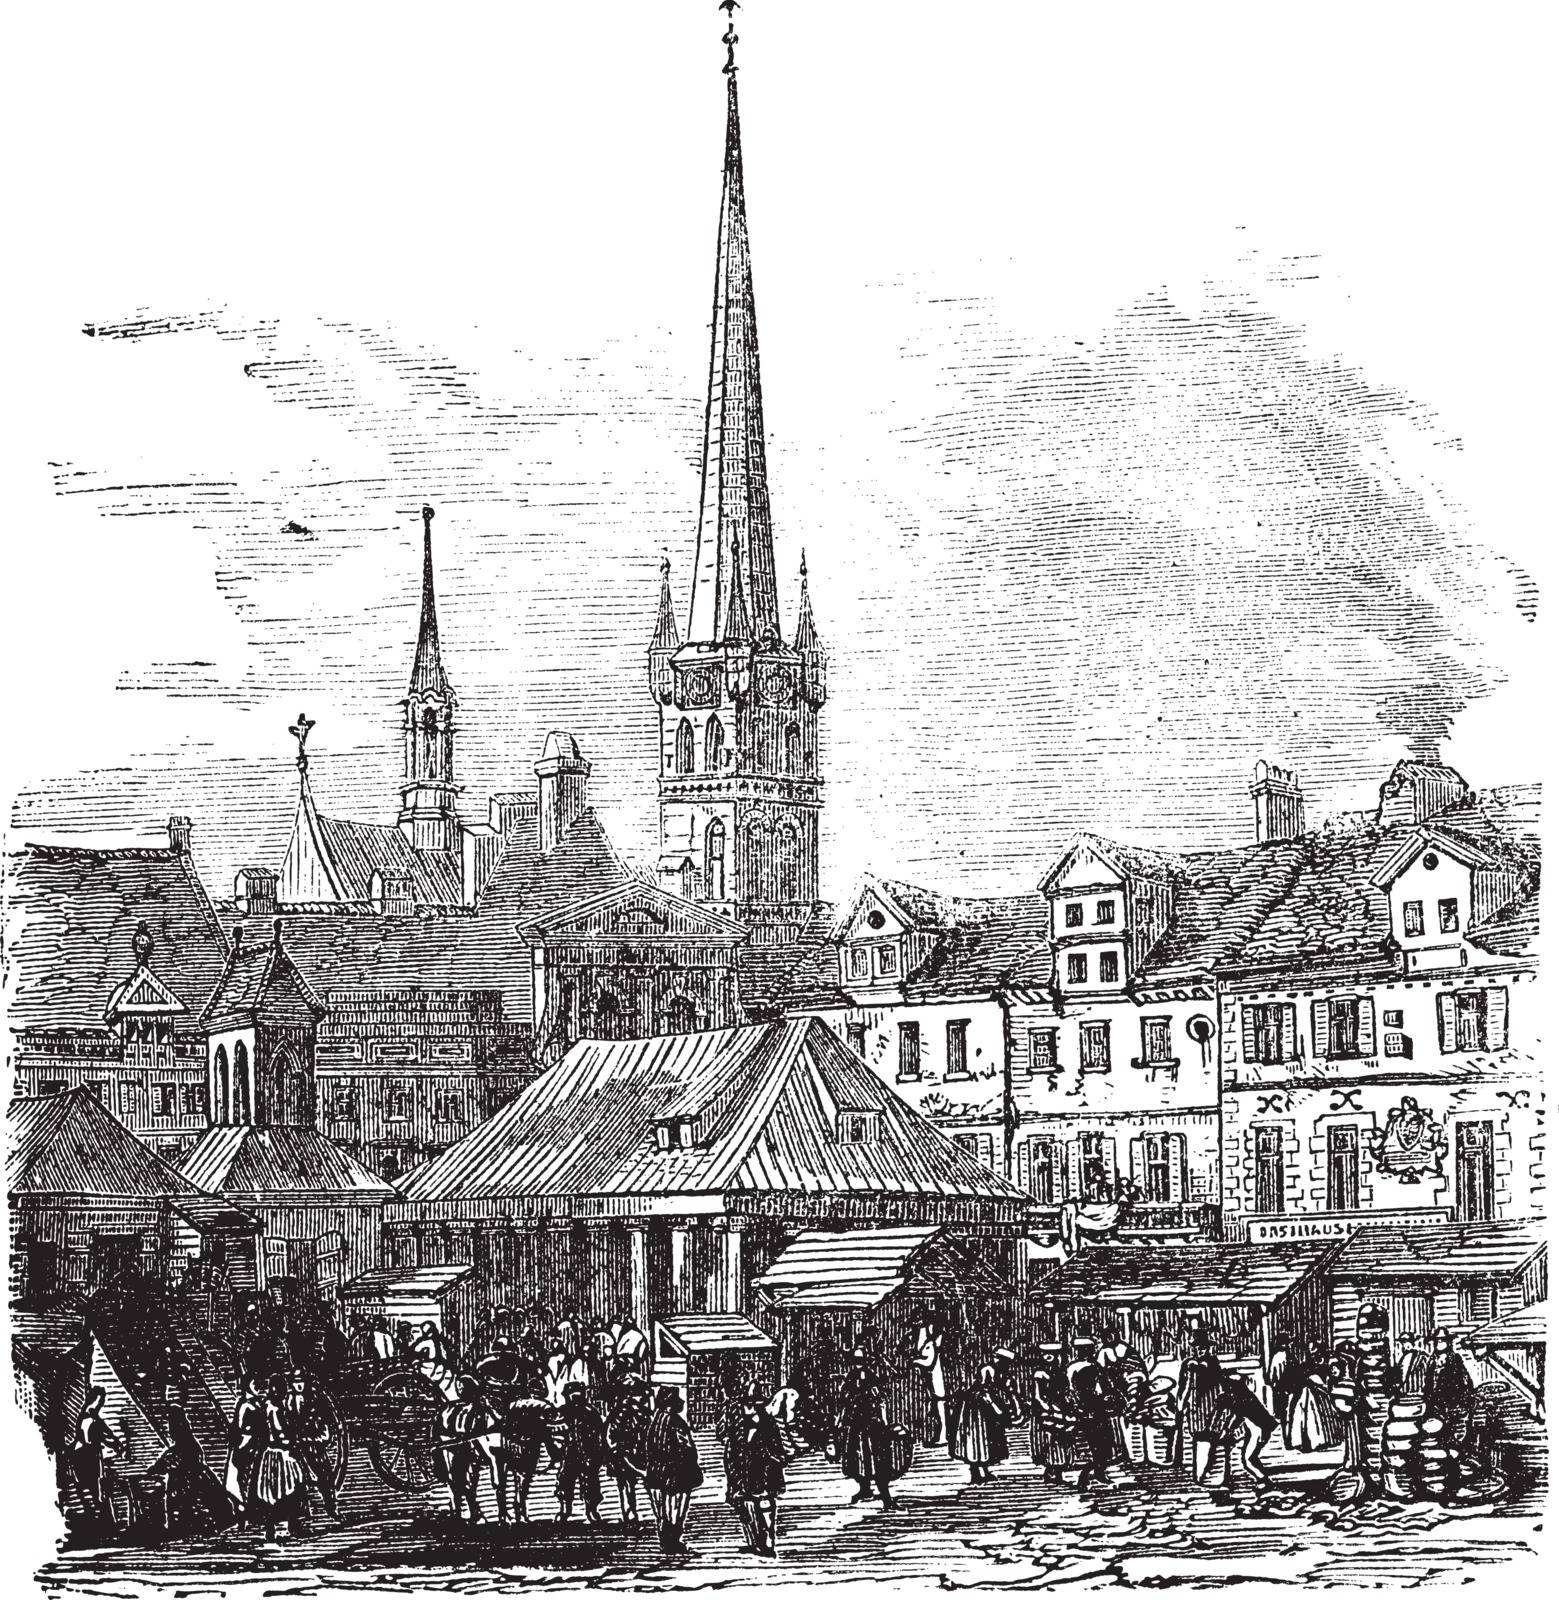 Market Place of Lubeck Germany vintage engraving by Morphart